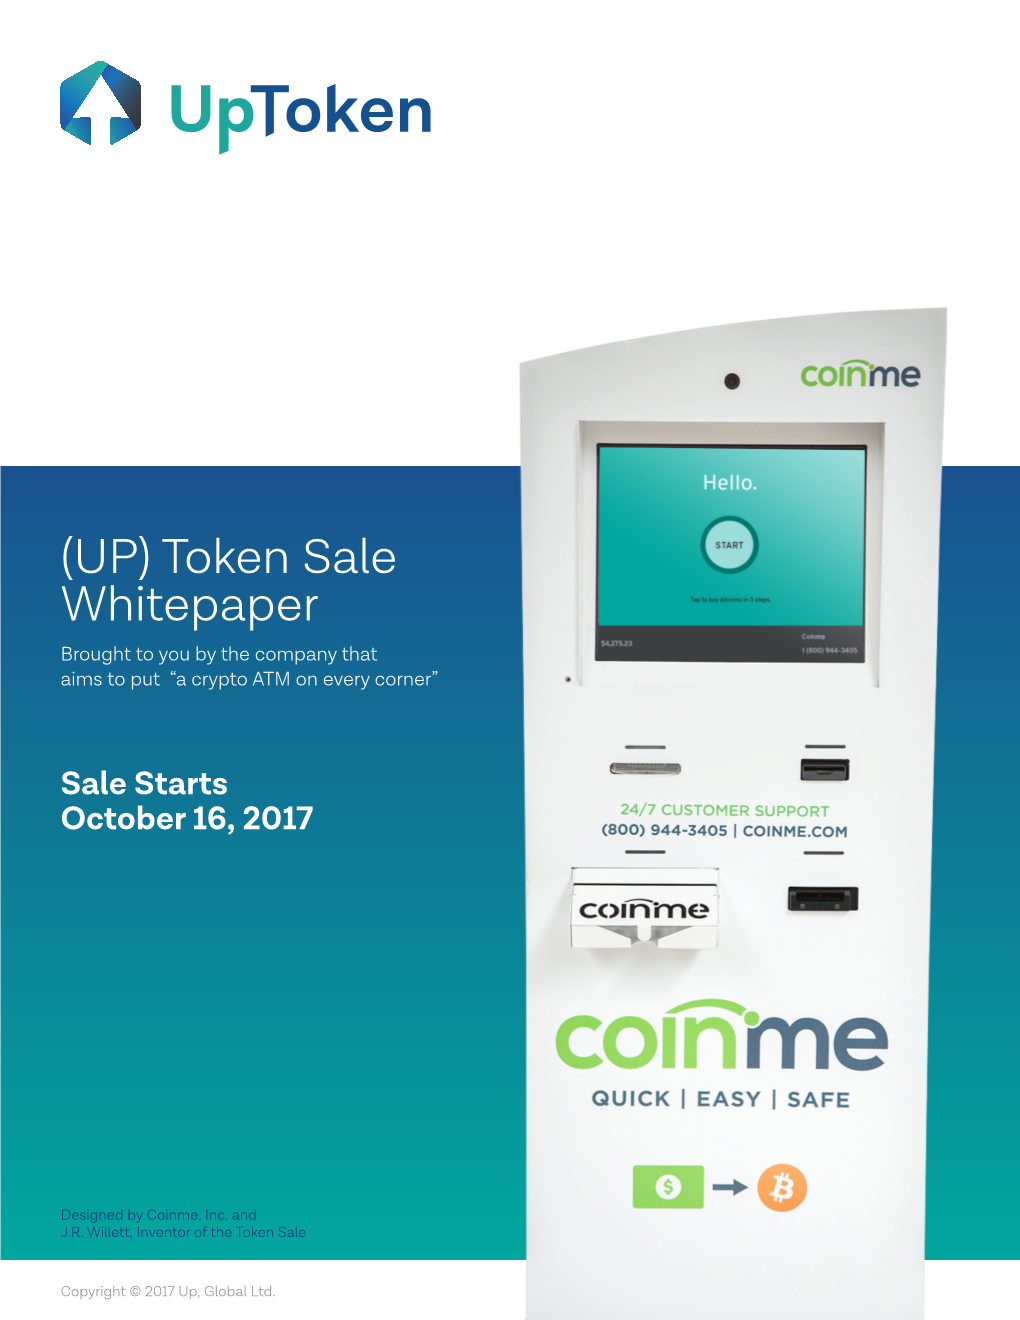 Whitepaper Brought to You by the Company That Aims to Put “A Crypto ATM on Every Corner”